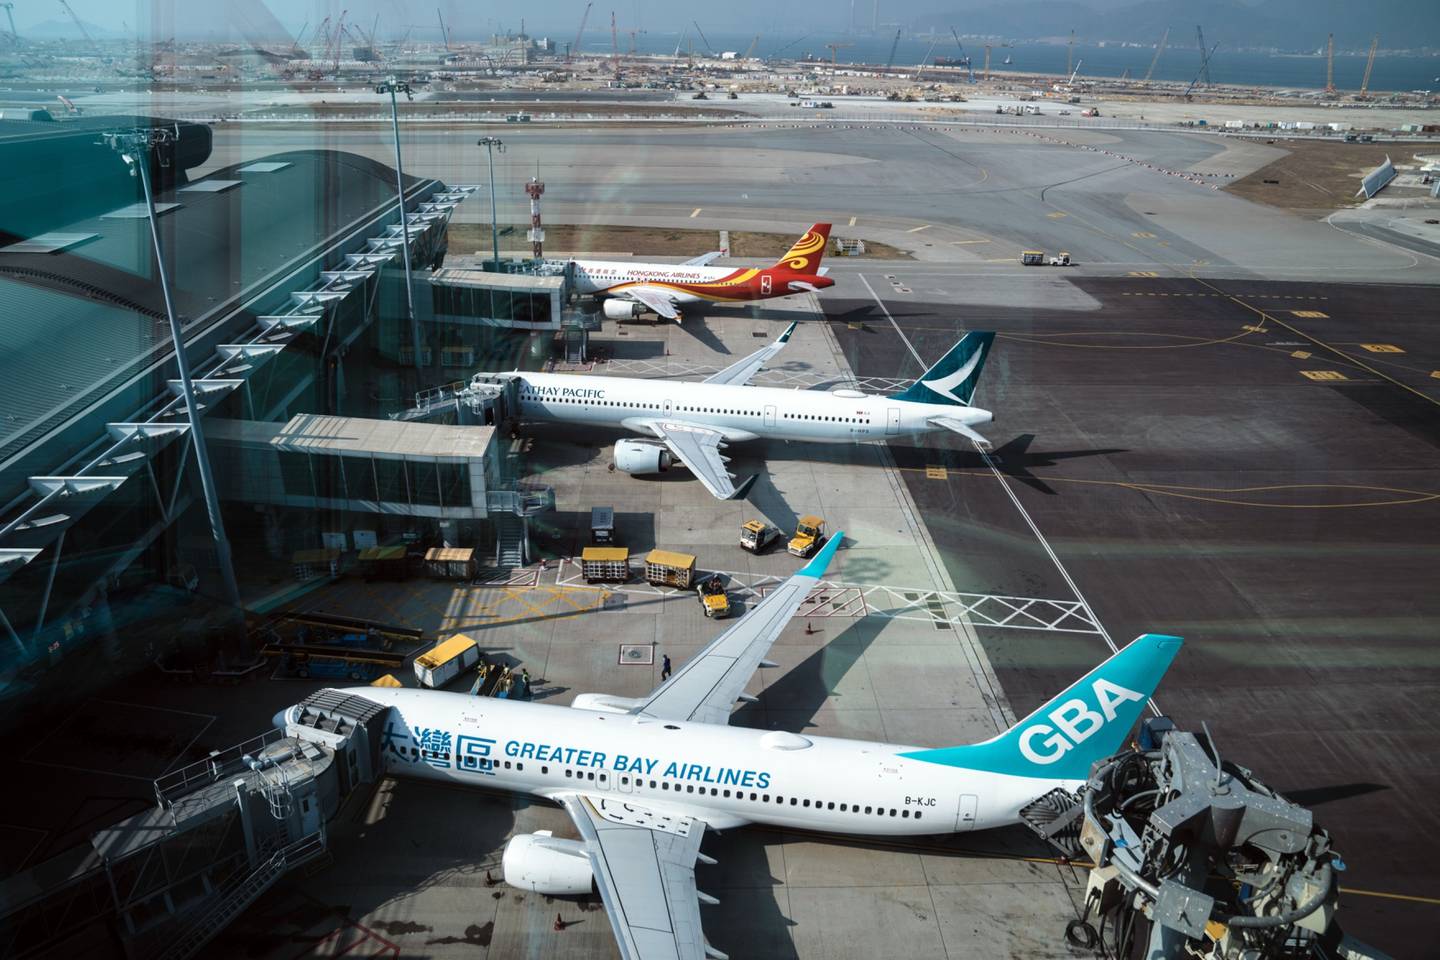 Aircraft operated by Greater Bay Airlines, Cathay Pacific Airways and Hong Kong Airlines at Hong Kong International Airport.dfd